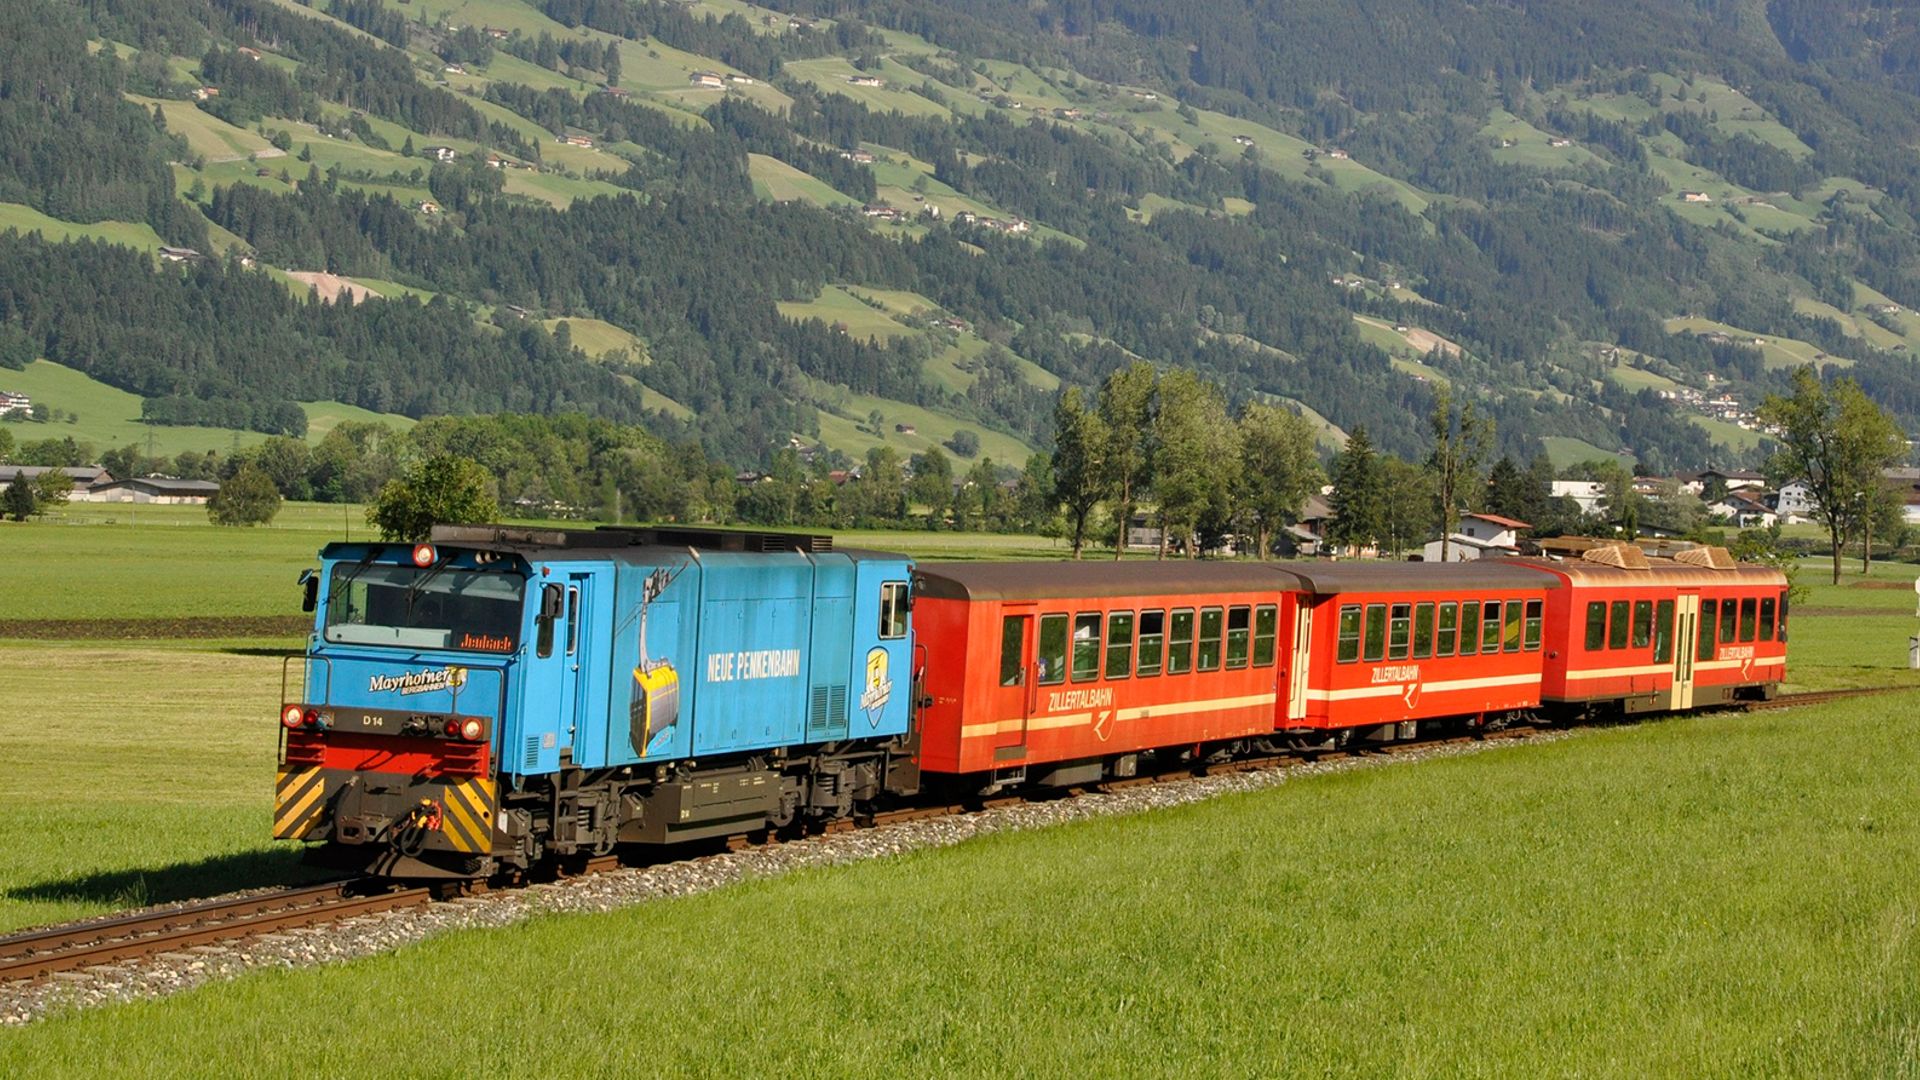 Travel to the Zillertal comfortably and safely by train.